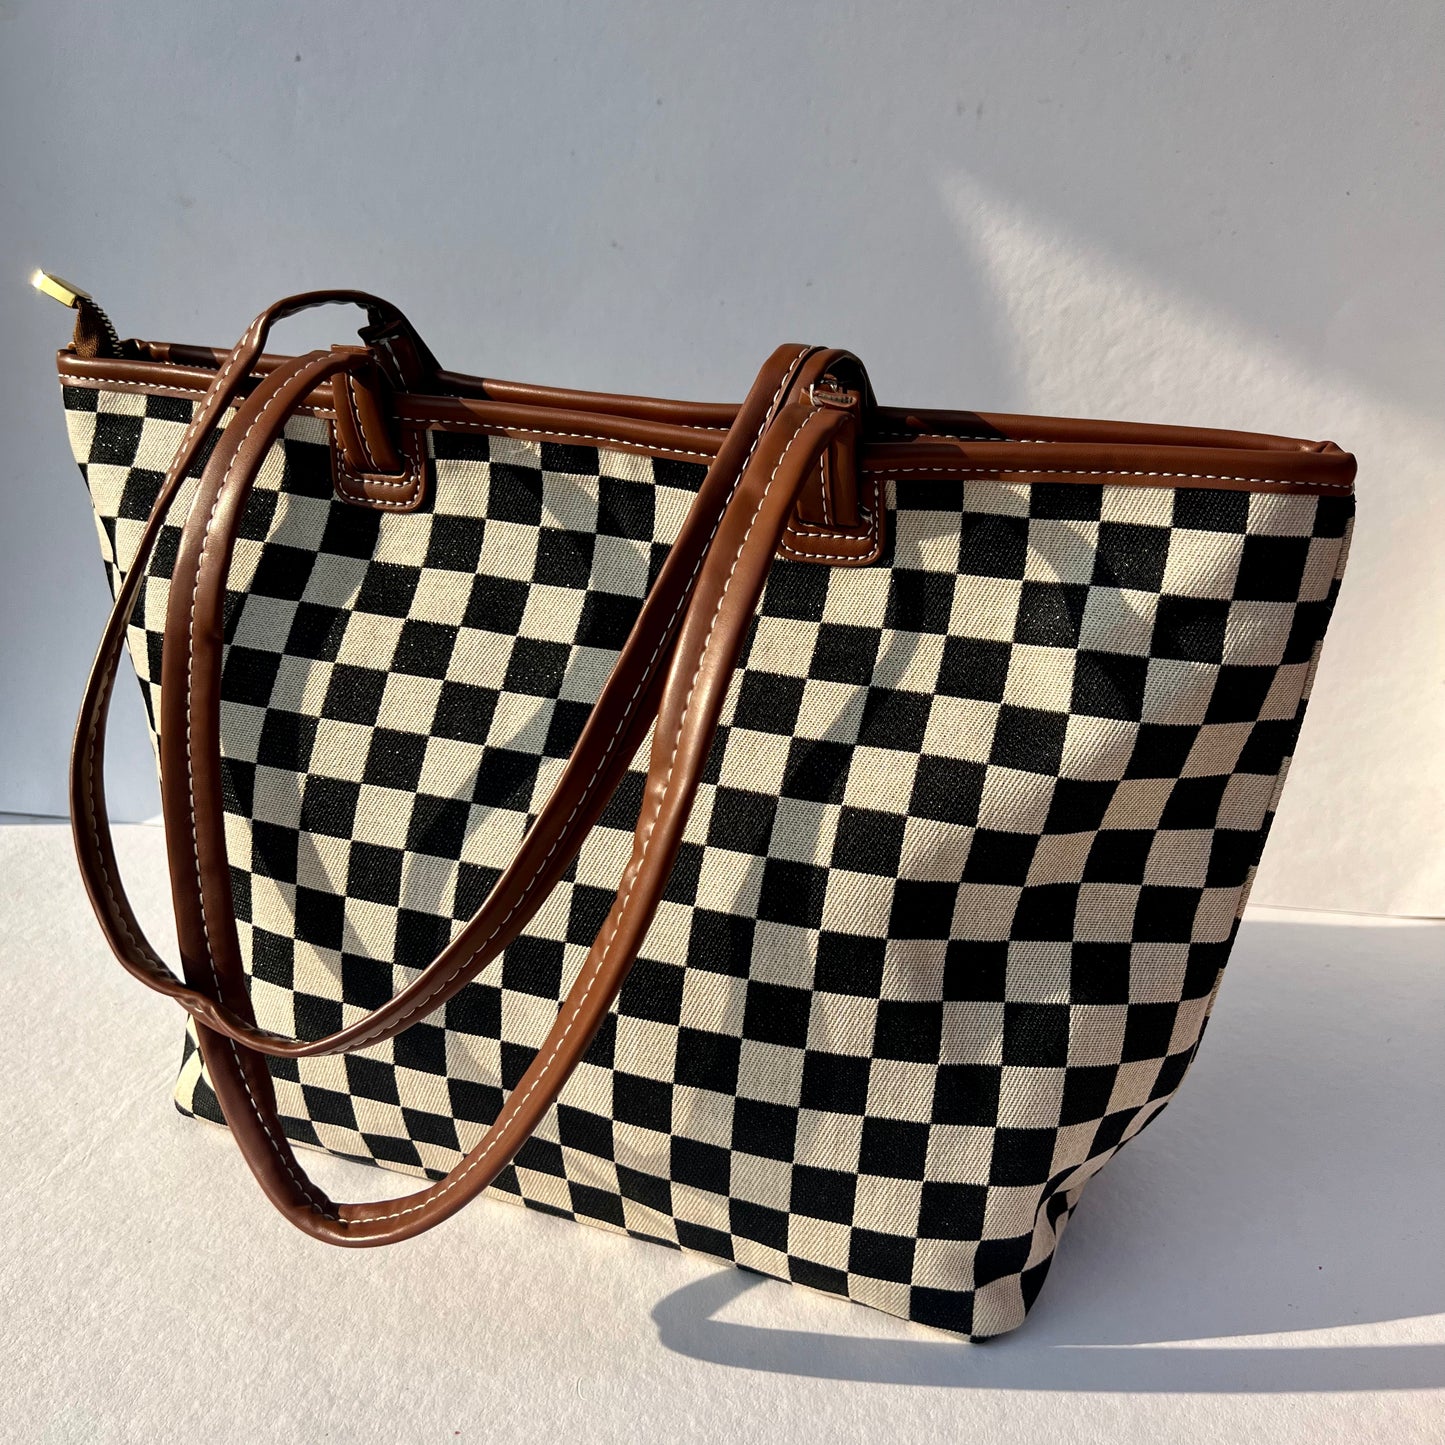 Textured Checked Tote Bag